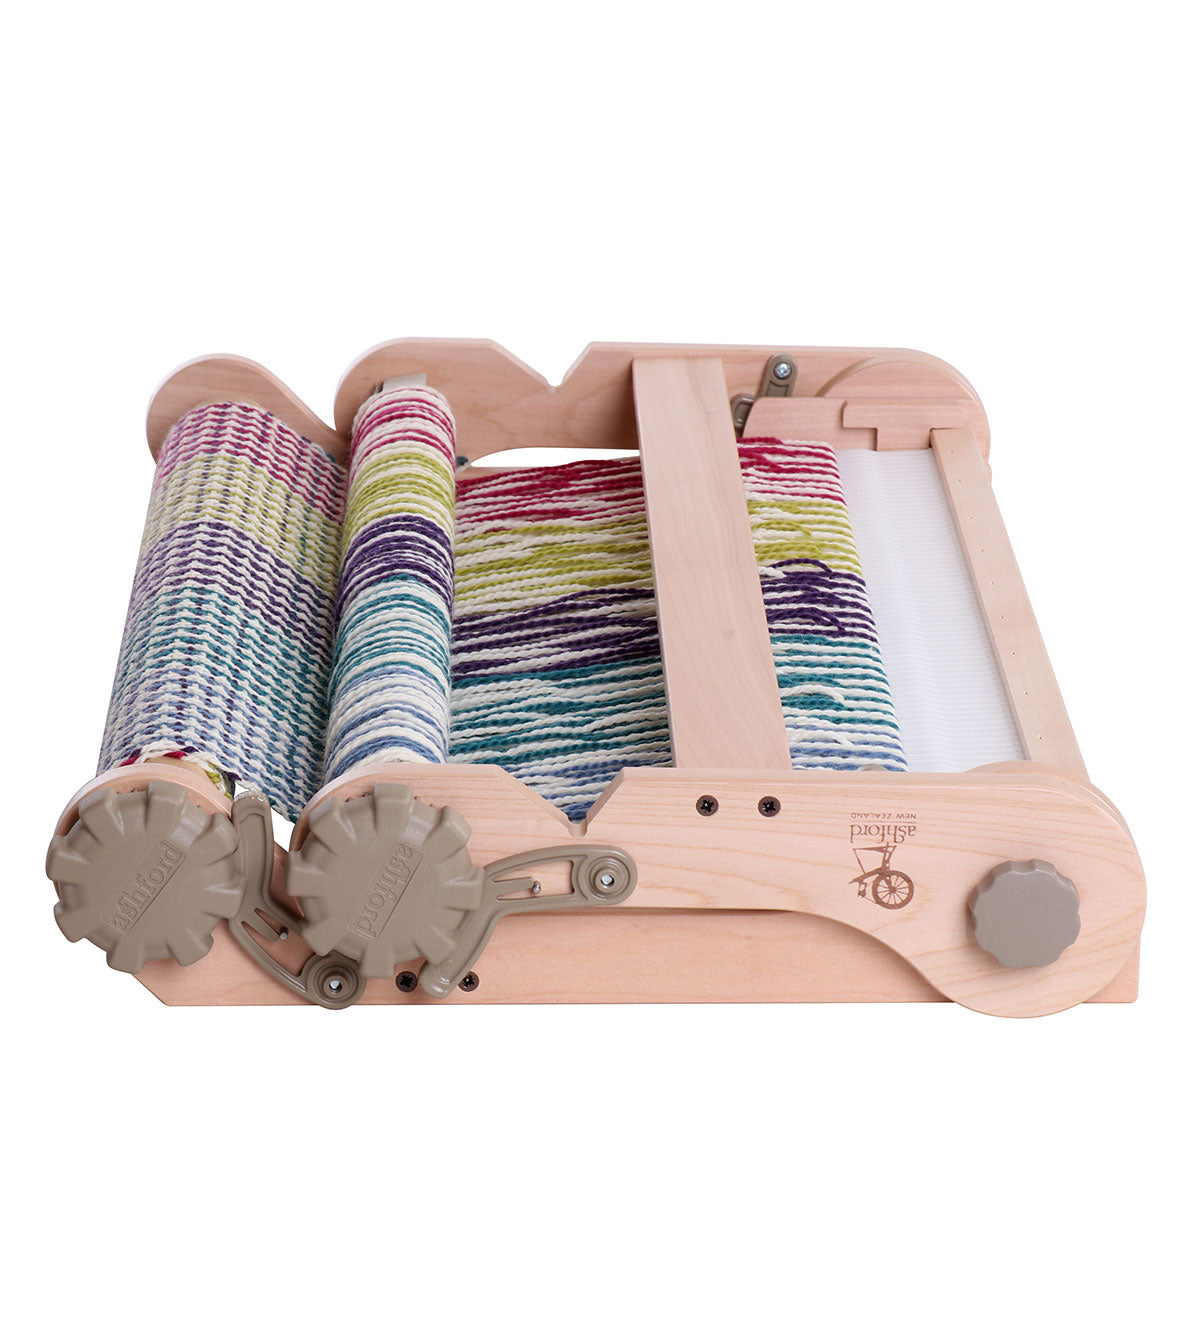 Knitter's loom folded in half for travel or storage.